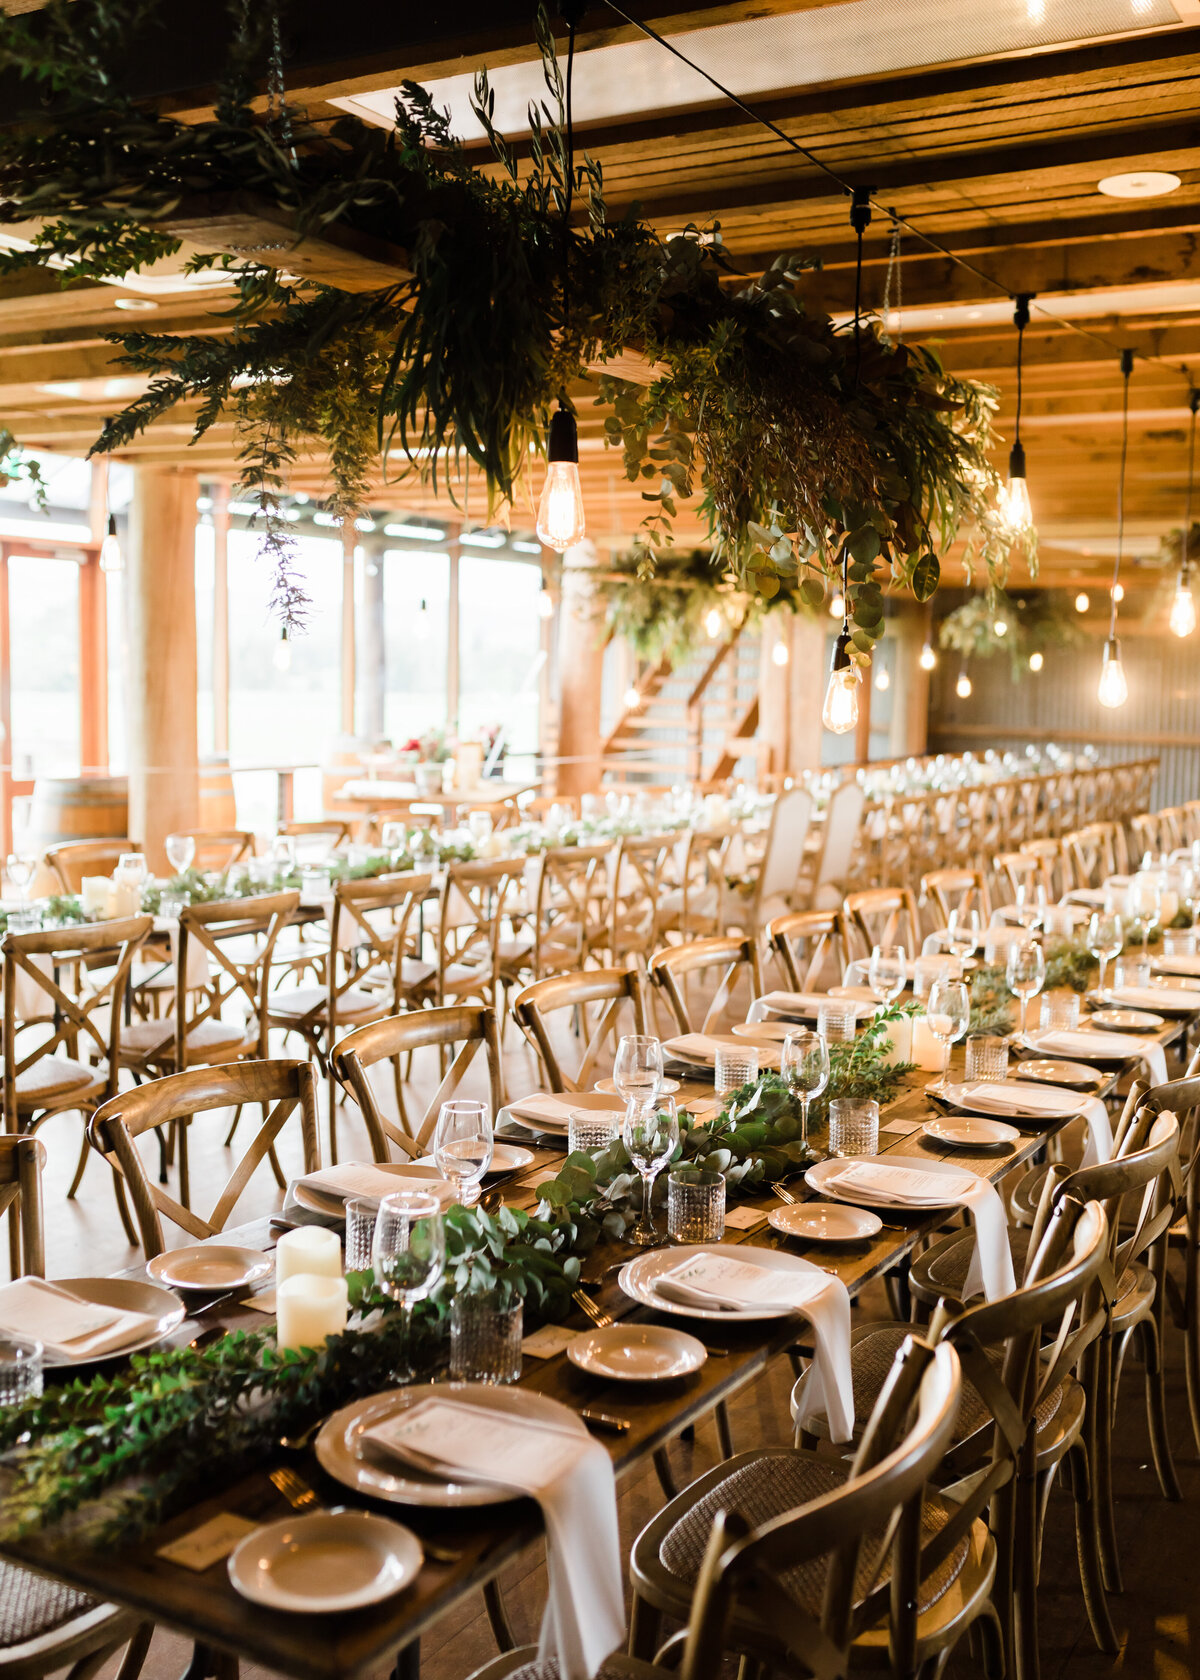 A wedding reception is set up on long wooden tables with a suspended cloud of greenery.